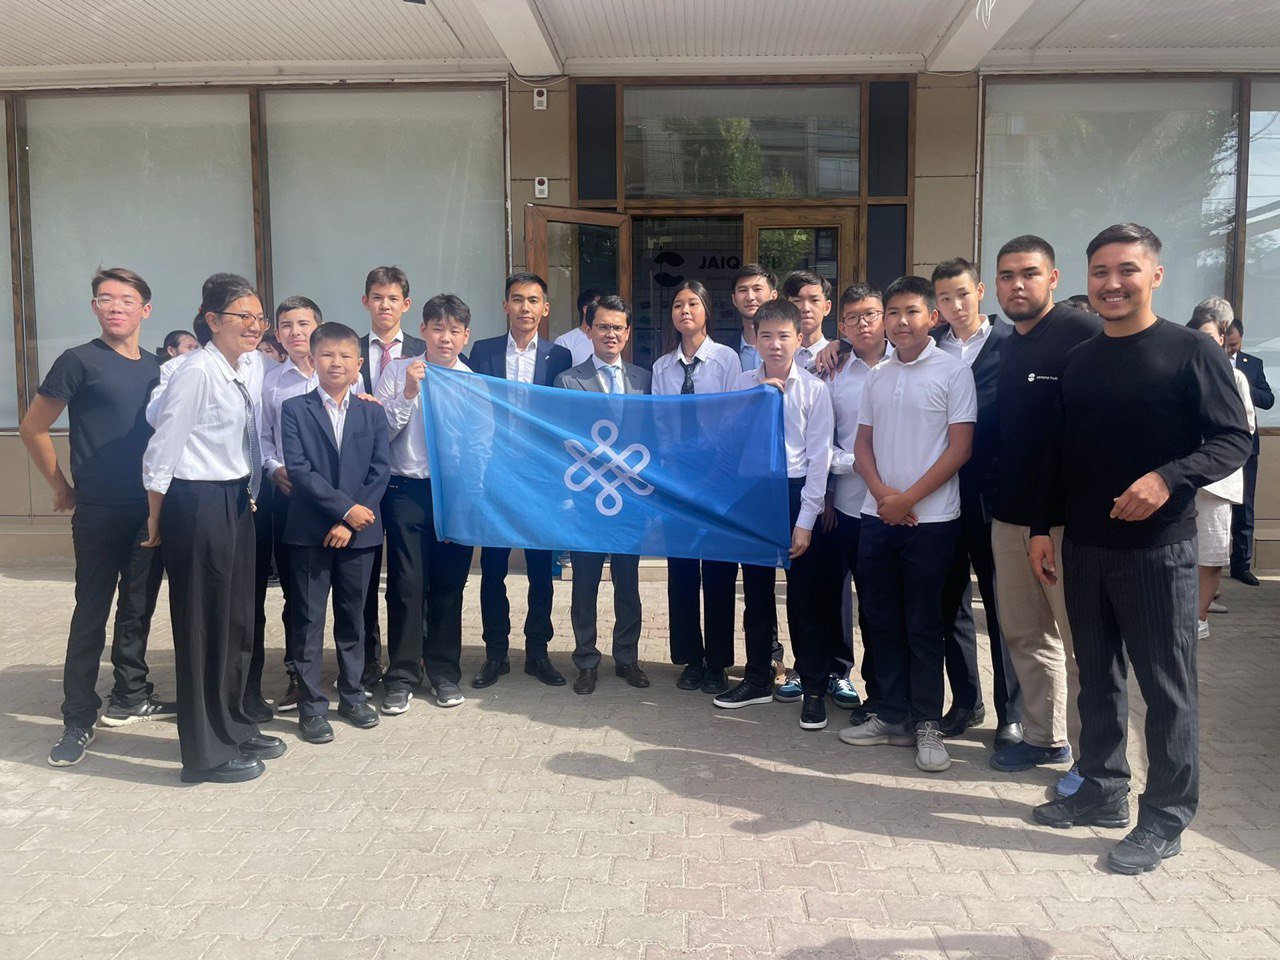 Minister of Digital Development, Innovation and Aerospace Industry of the Republic of Kazakhstan Bagdat Musin arrived on a working visit to the West Kazakhstan region.